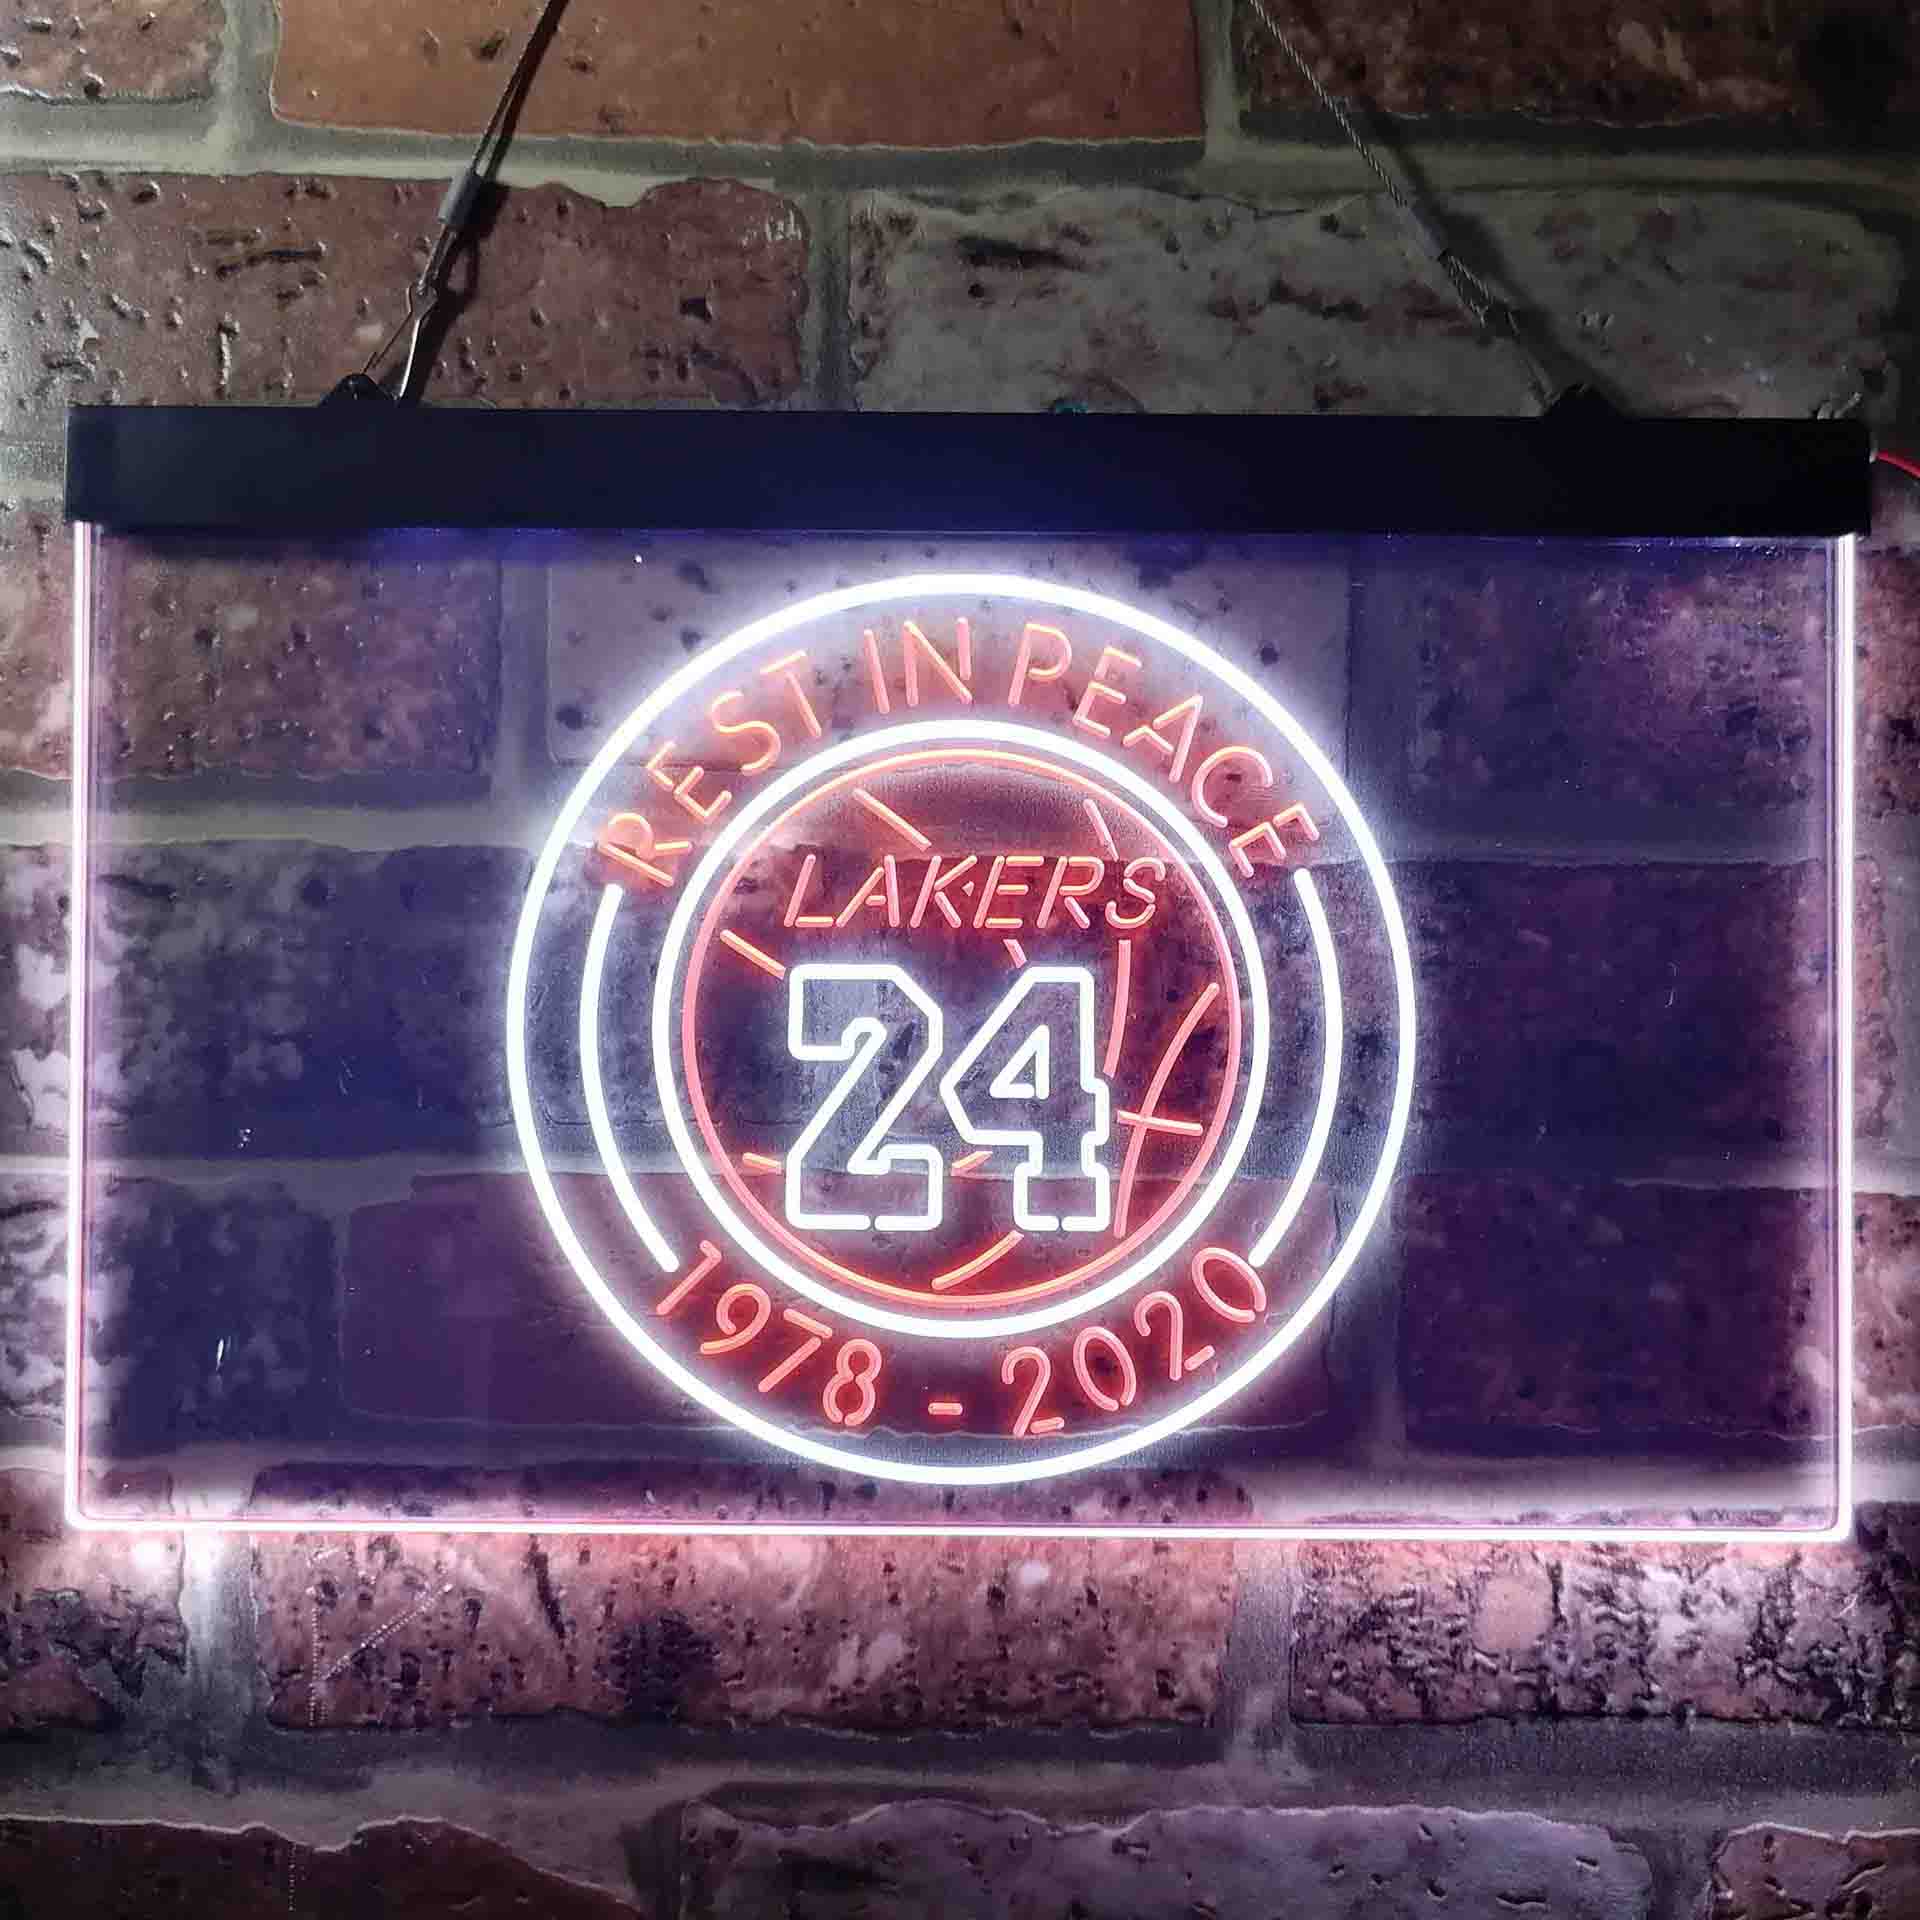 Lakers 24 Rest in Peace 1978-2020 Neon-Like LED Sign